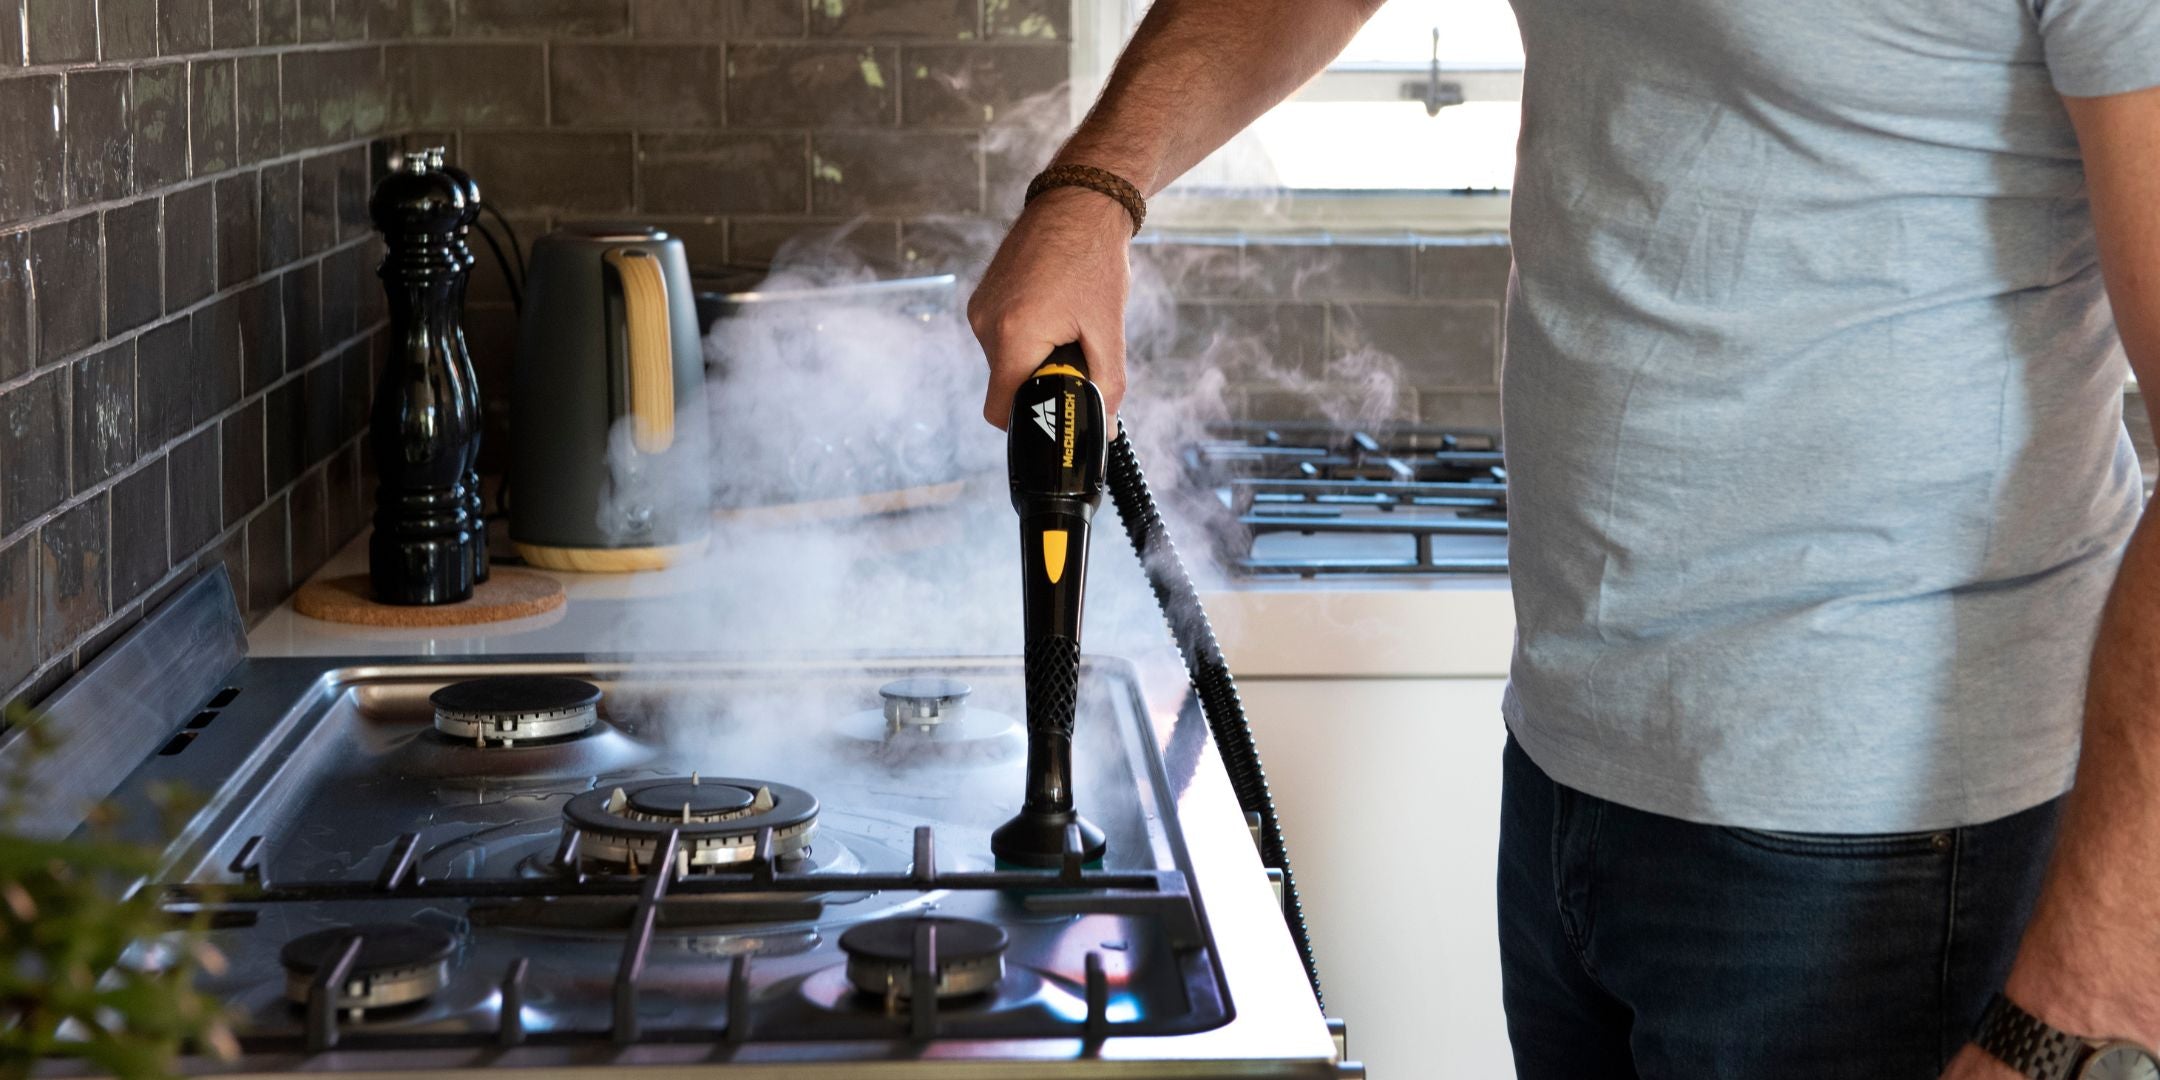 Man using High Pressure McCulloch Steam Cleaner to clean stove top using round sponge attachement.